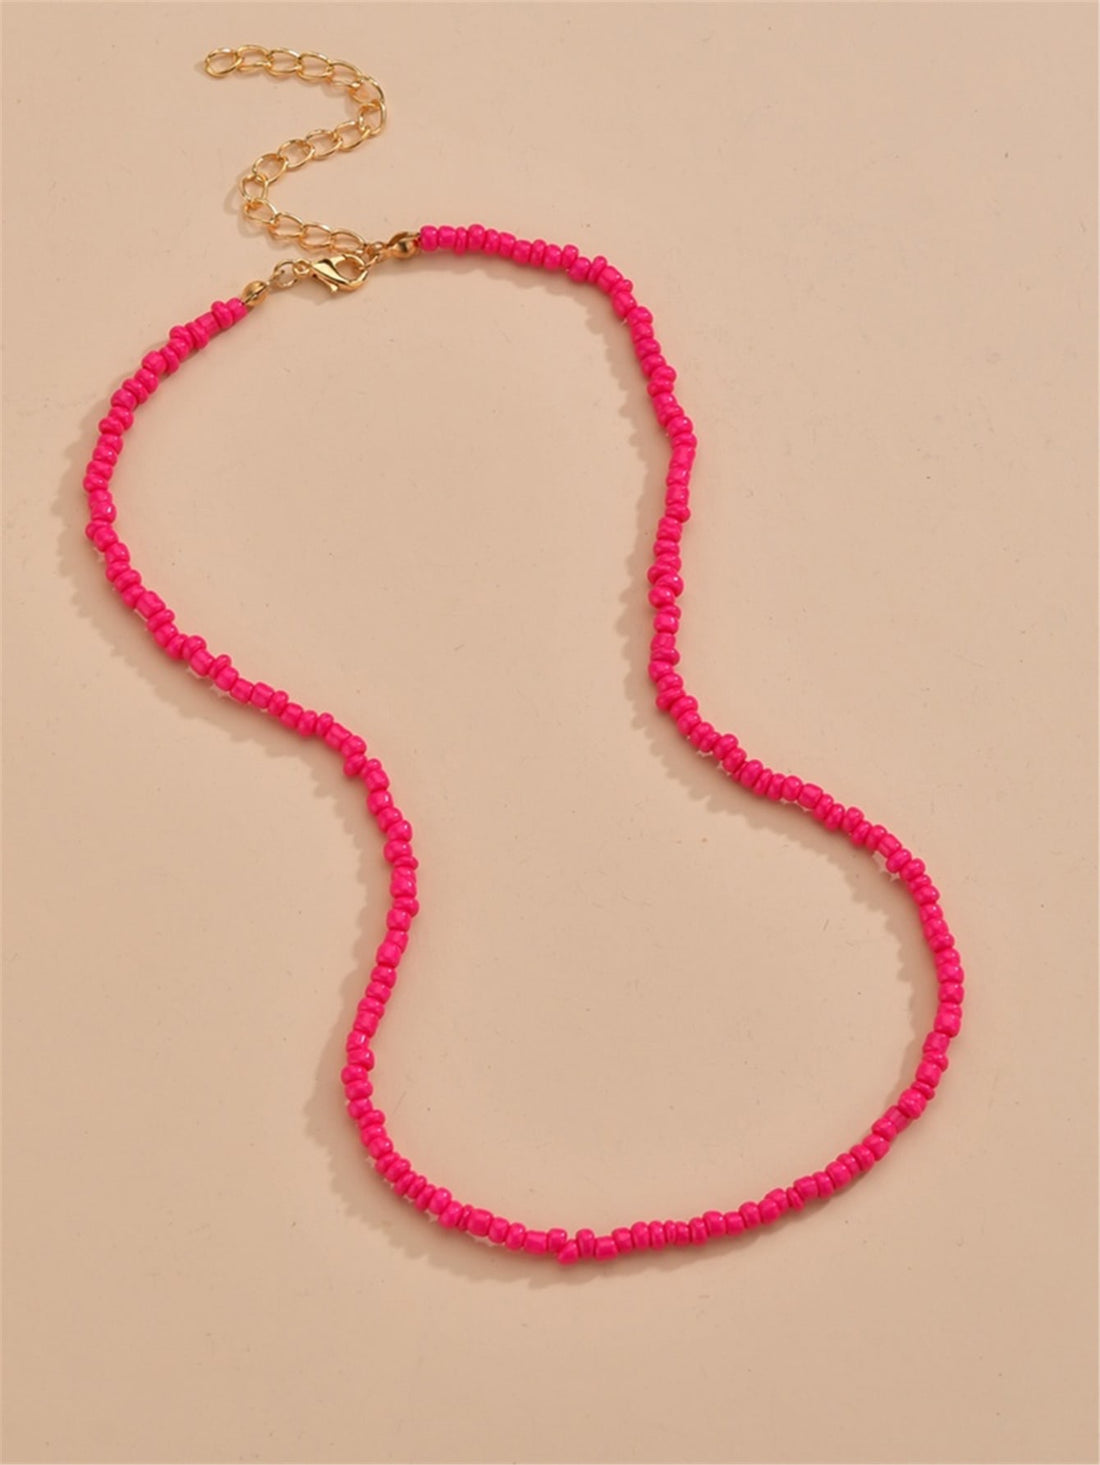 Hot Pink Beaded Necklace